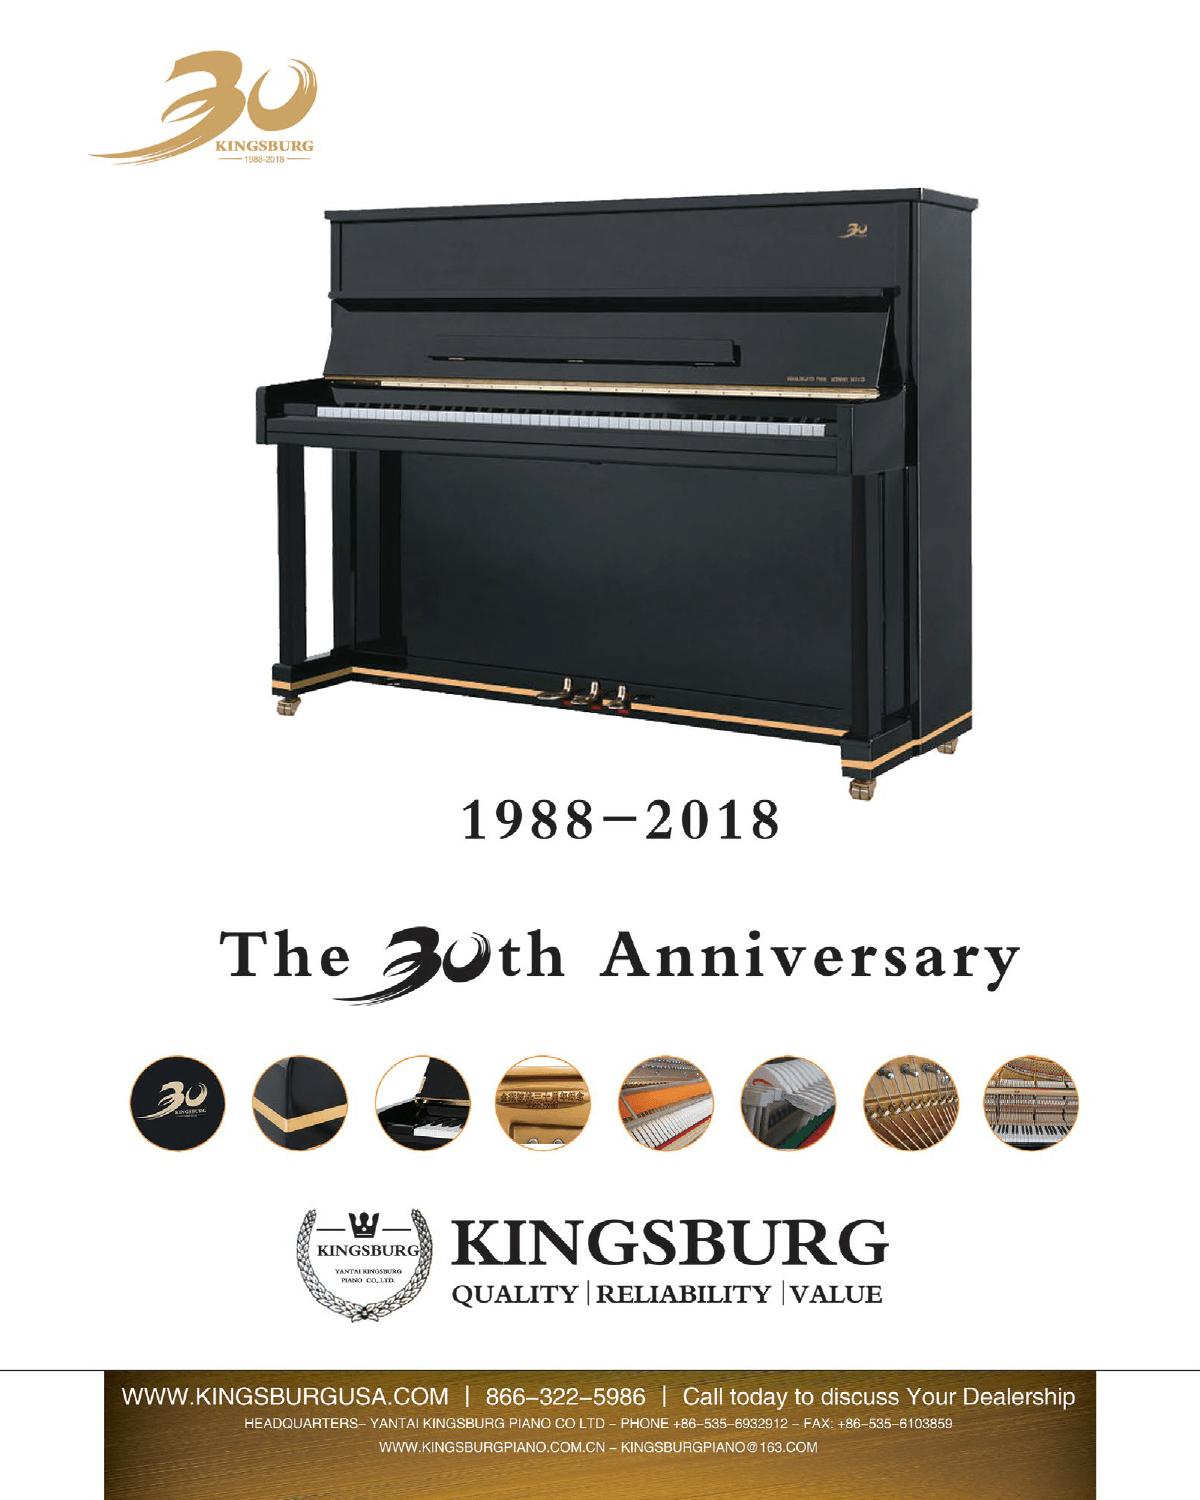 Kingsburg Pianos, Quality, Reliability and Value